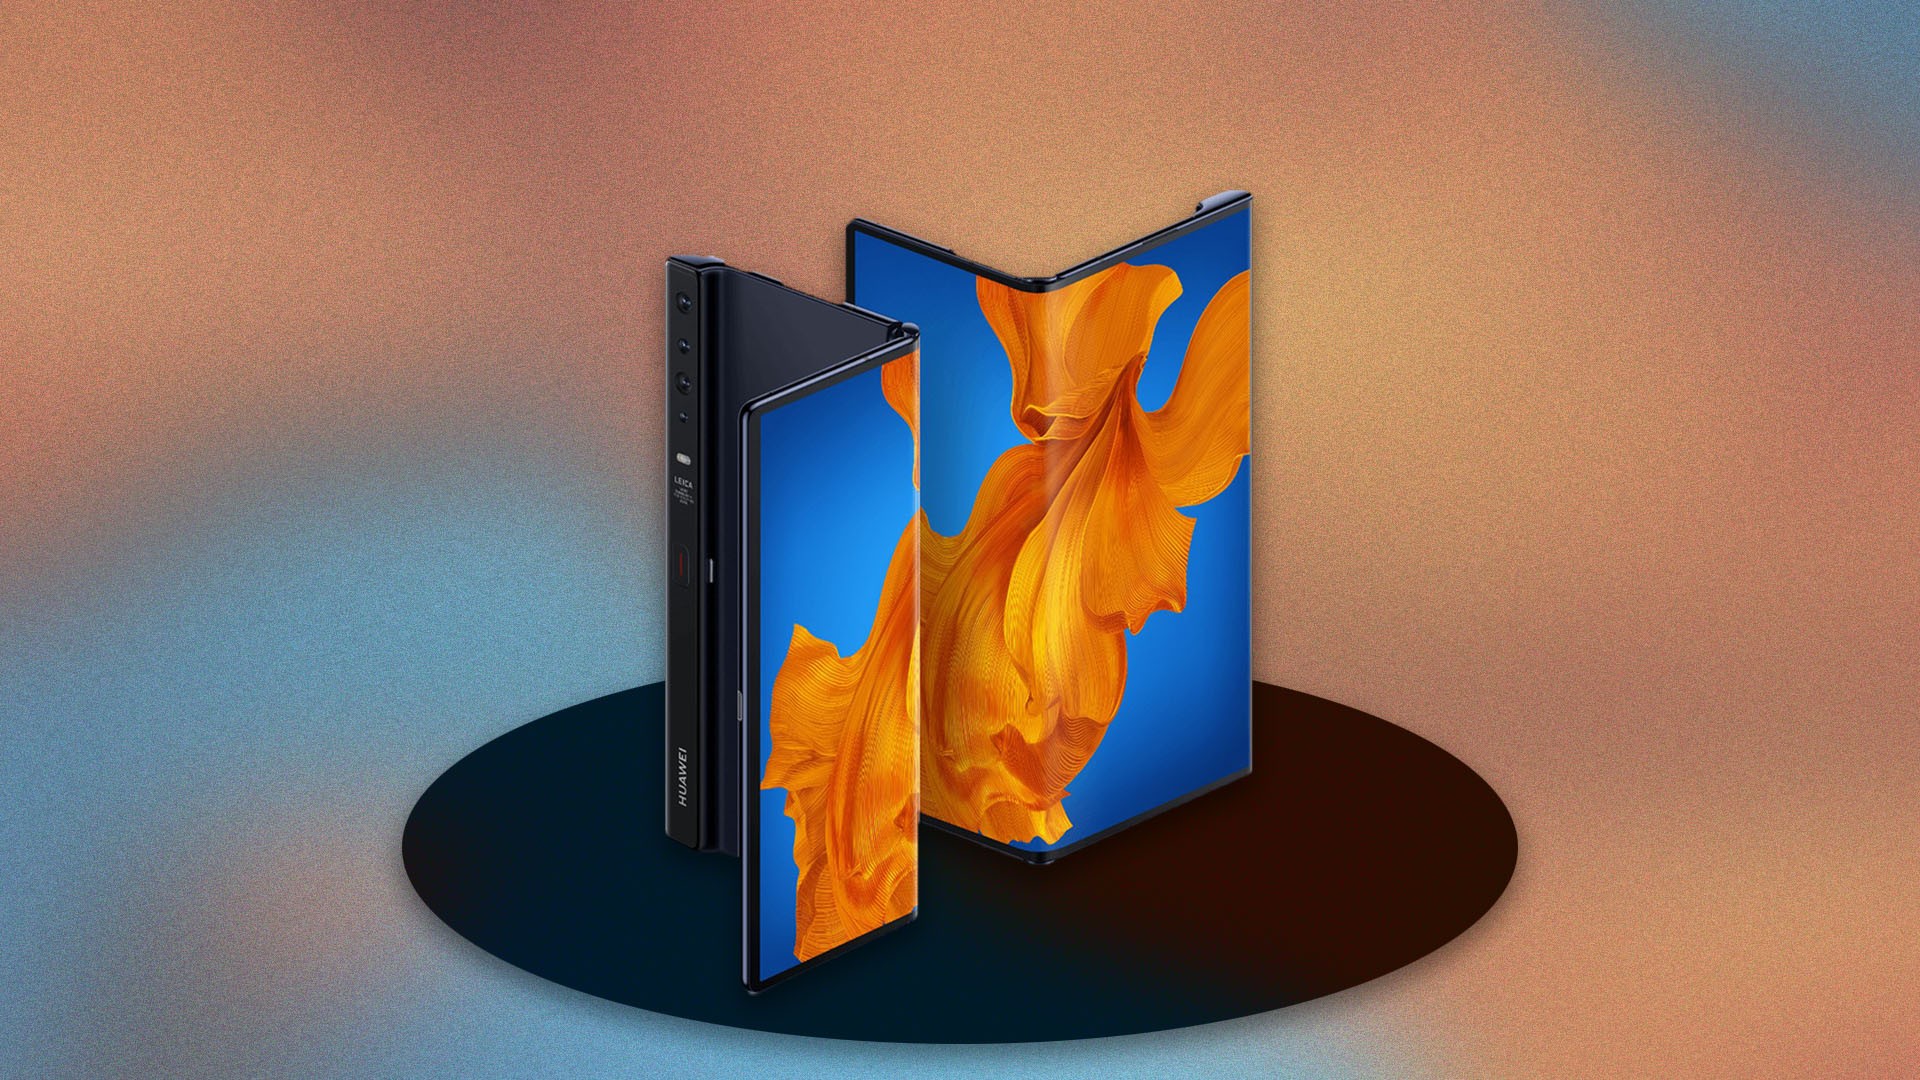 Xiaomi's foldable prototype shows off a phone that resembles the Huawei Mate X
